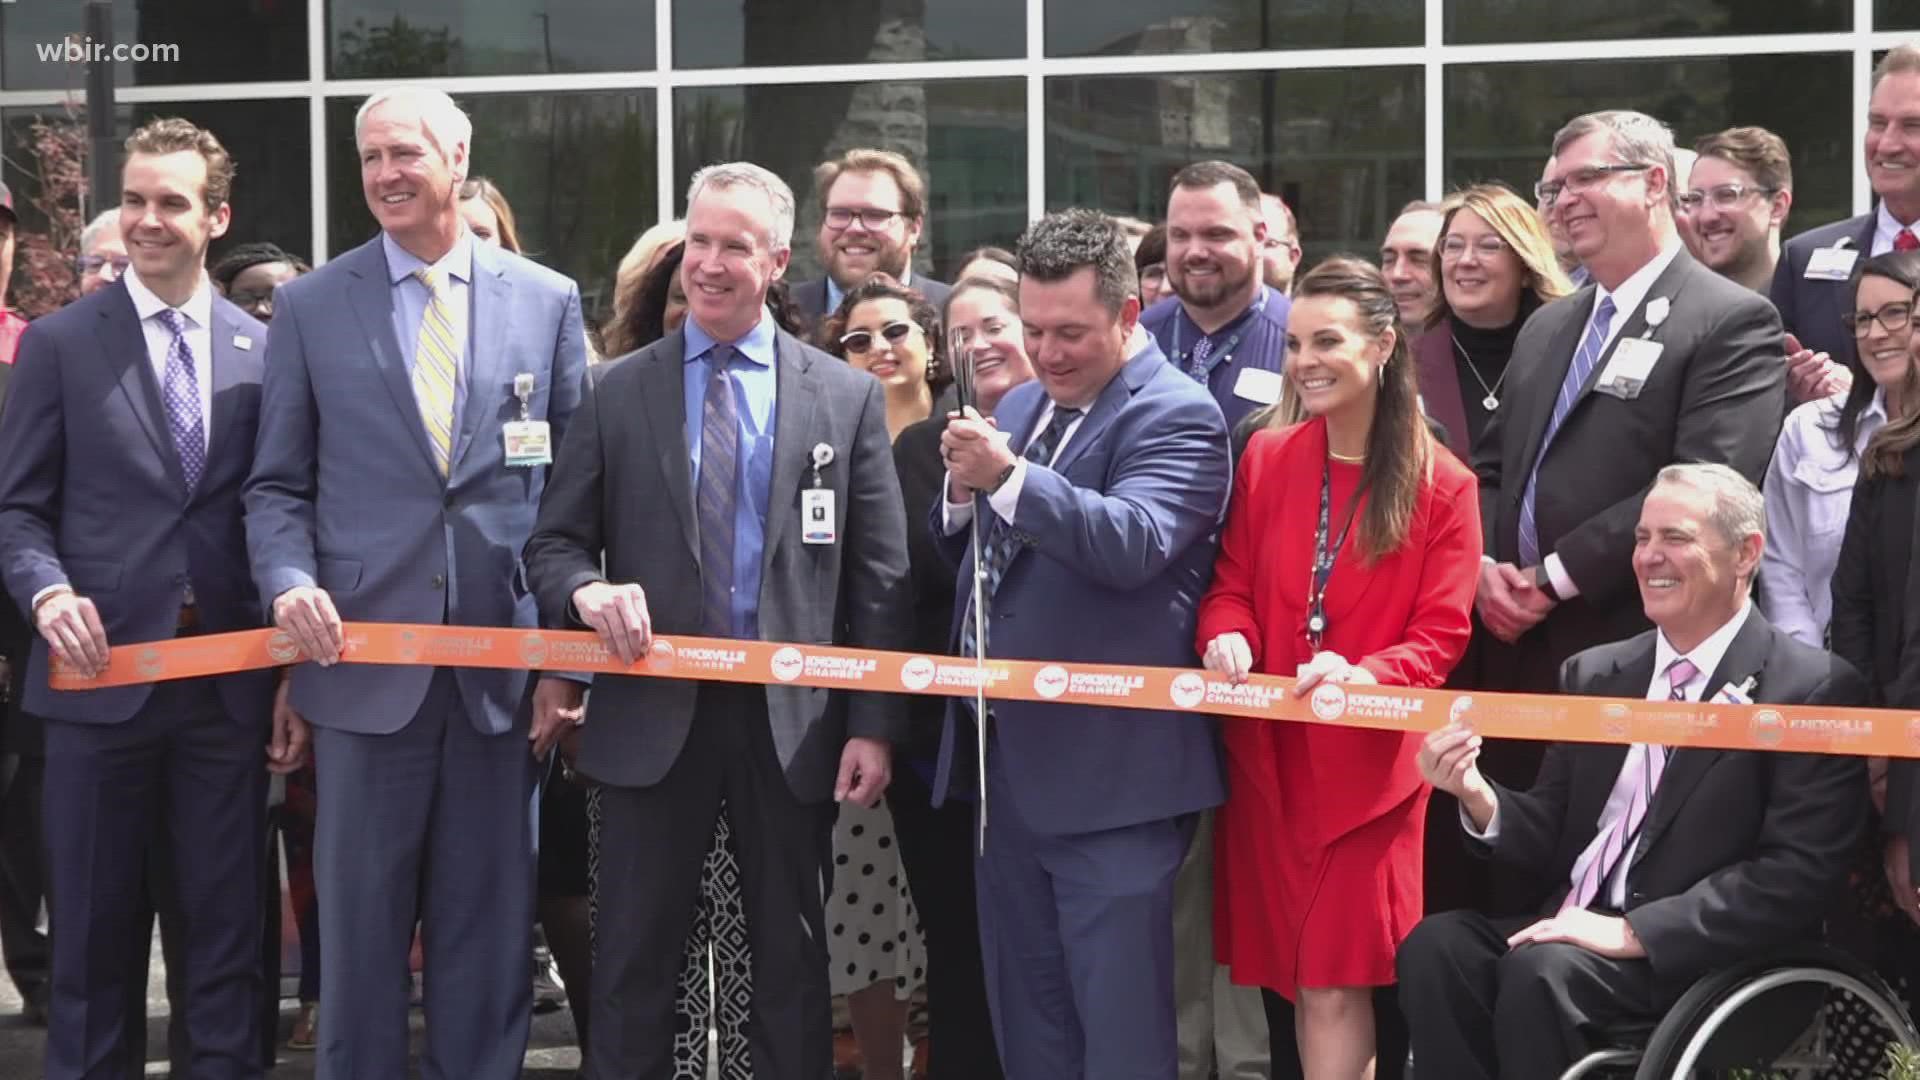 The Knoxville Center for Behavioral Medicine hosted a ribbon-cutting ceremony on Thursday attended by physicians, partners and community leaders.